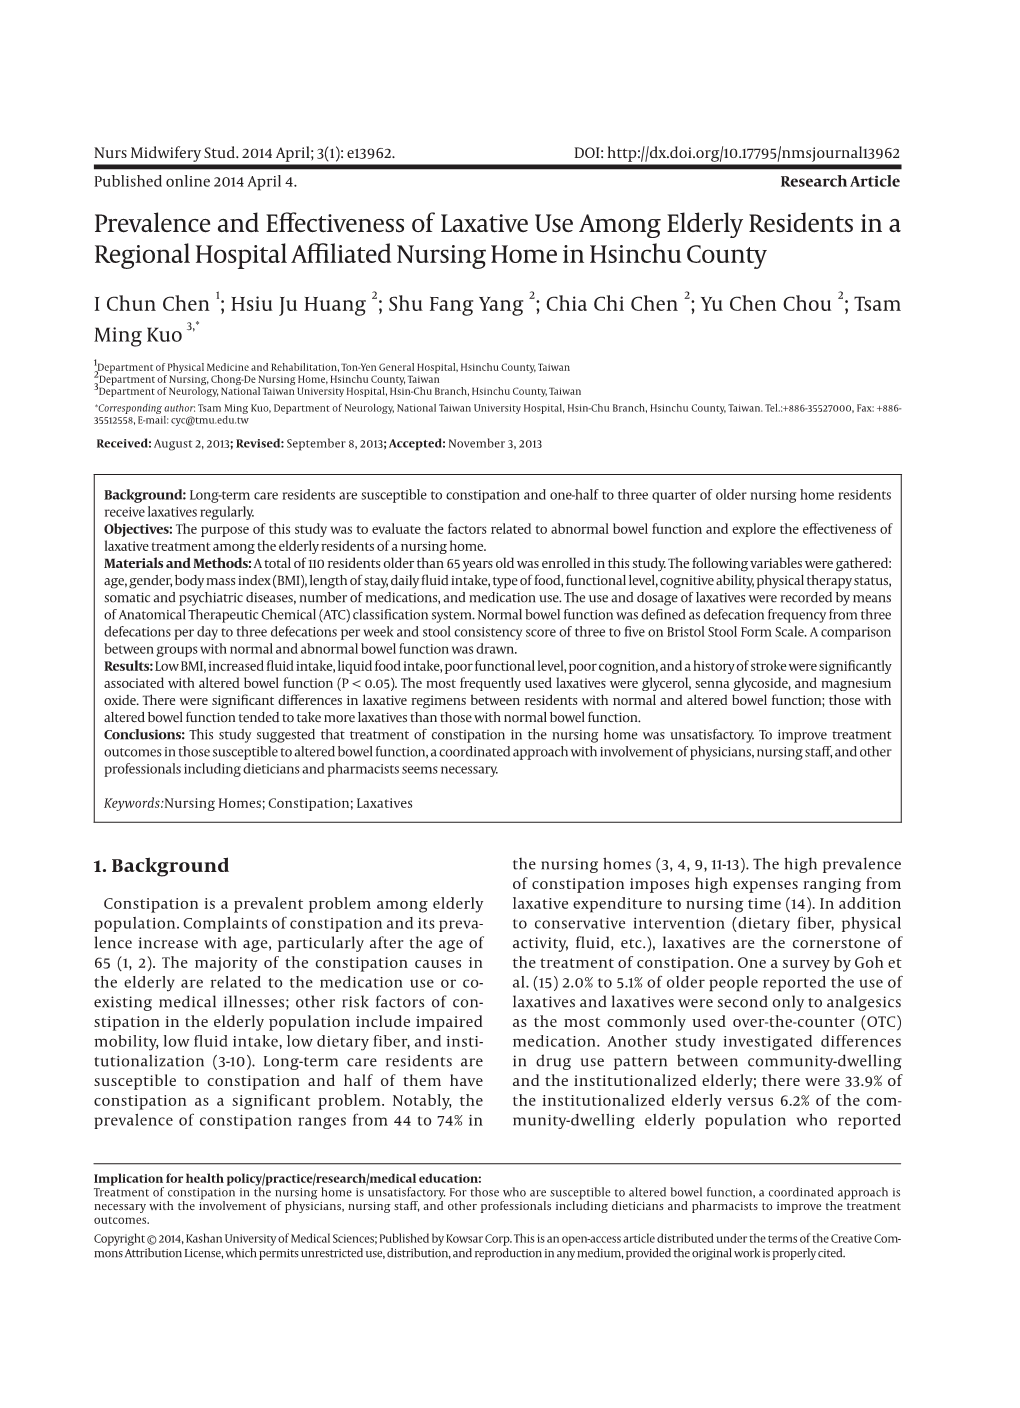 Prevalence and Effectiveness of Laxative Use Among Elderly Residents in a Regional Hospital Affiliated Nursing Home in Hsinchu County